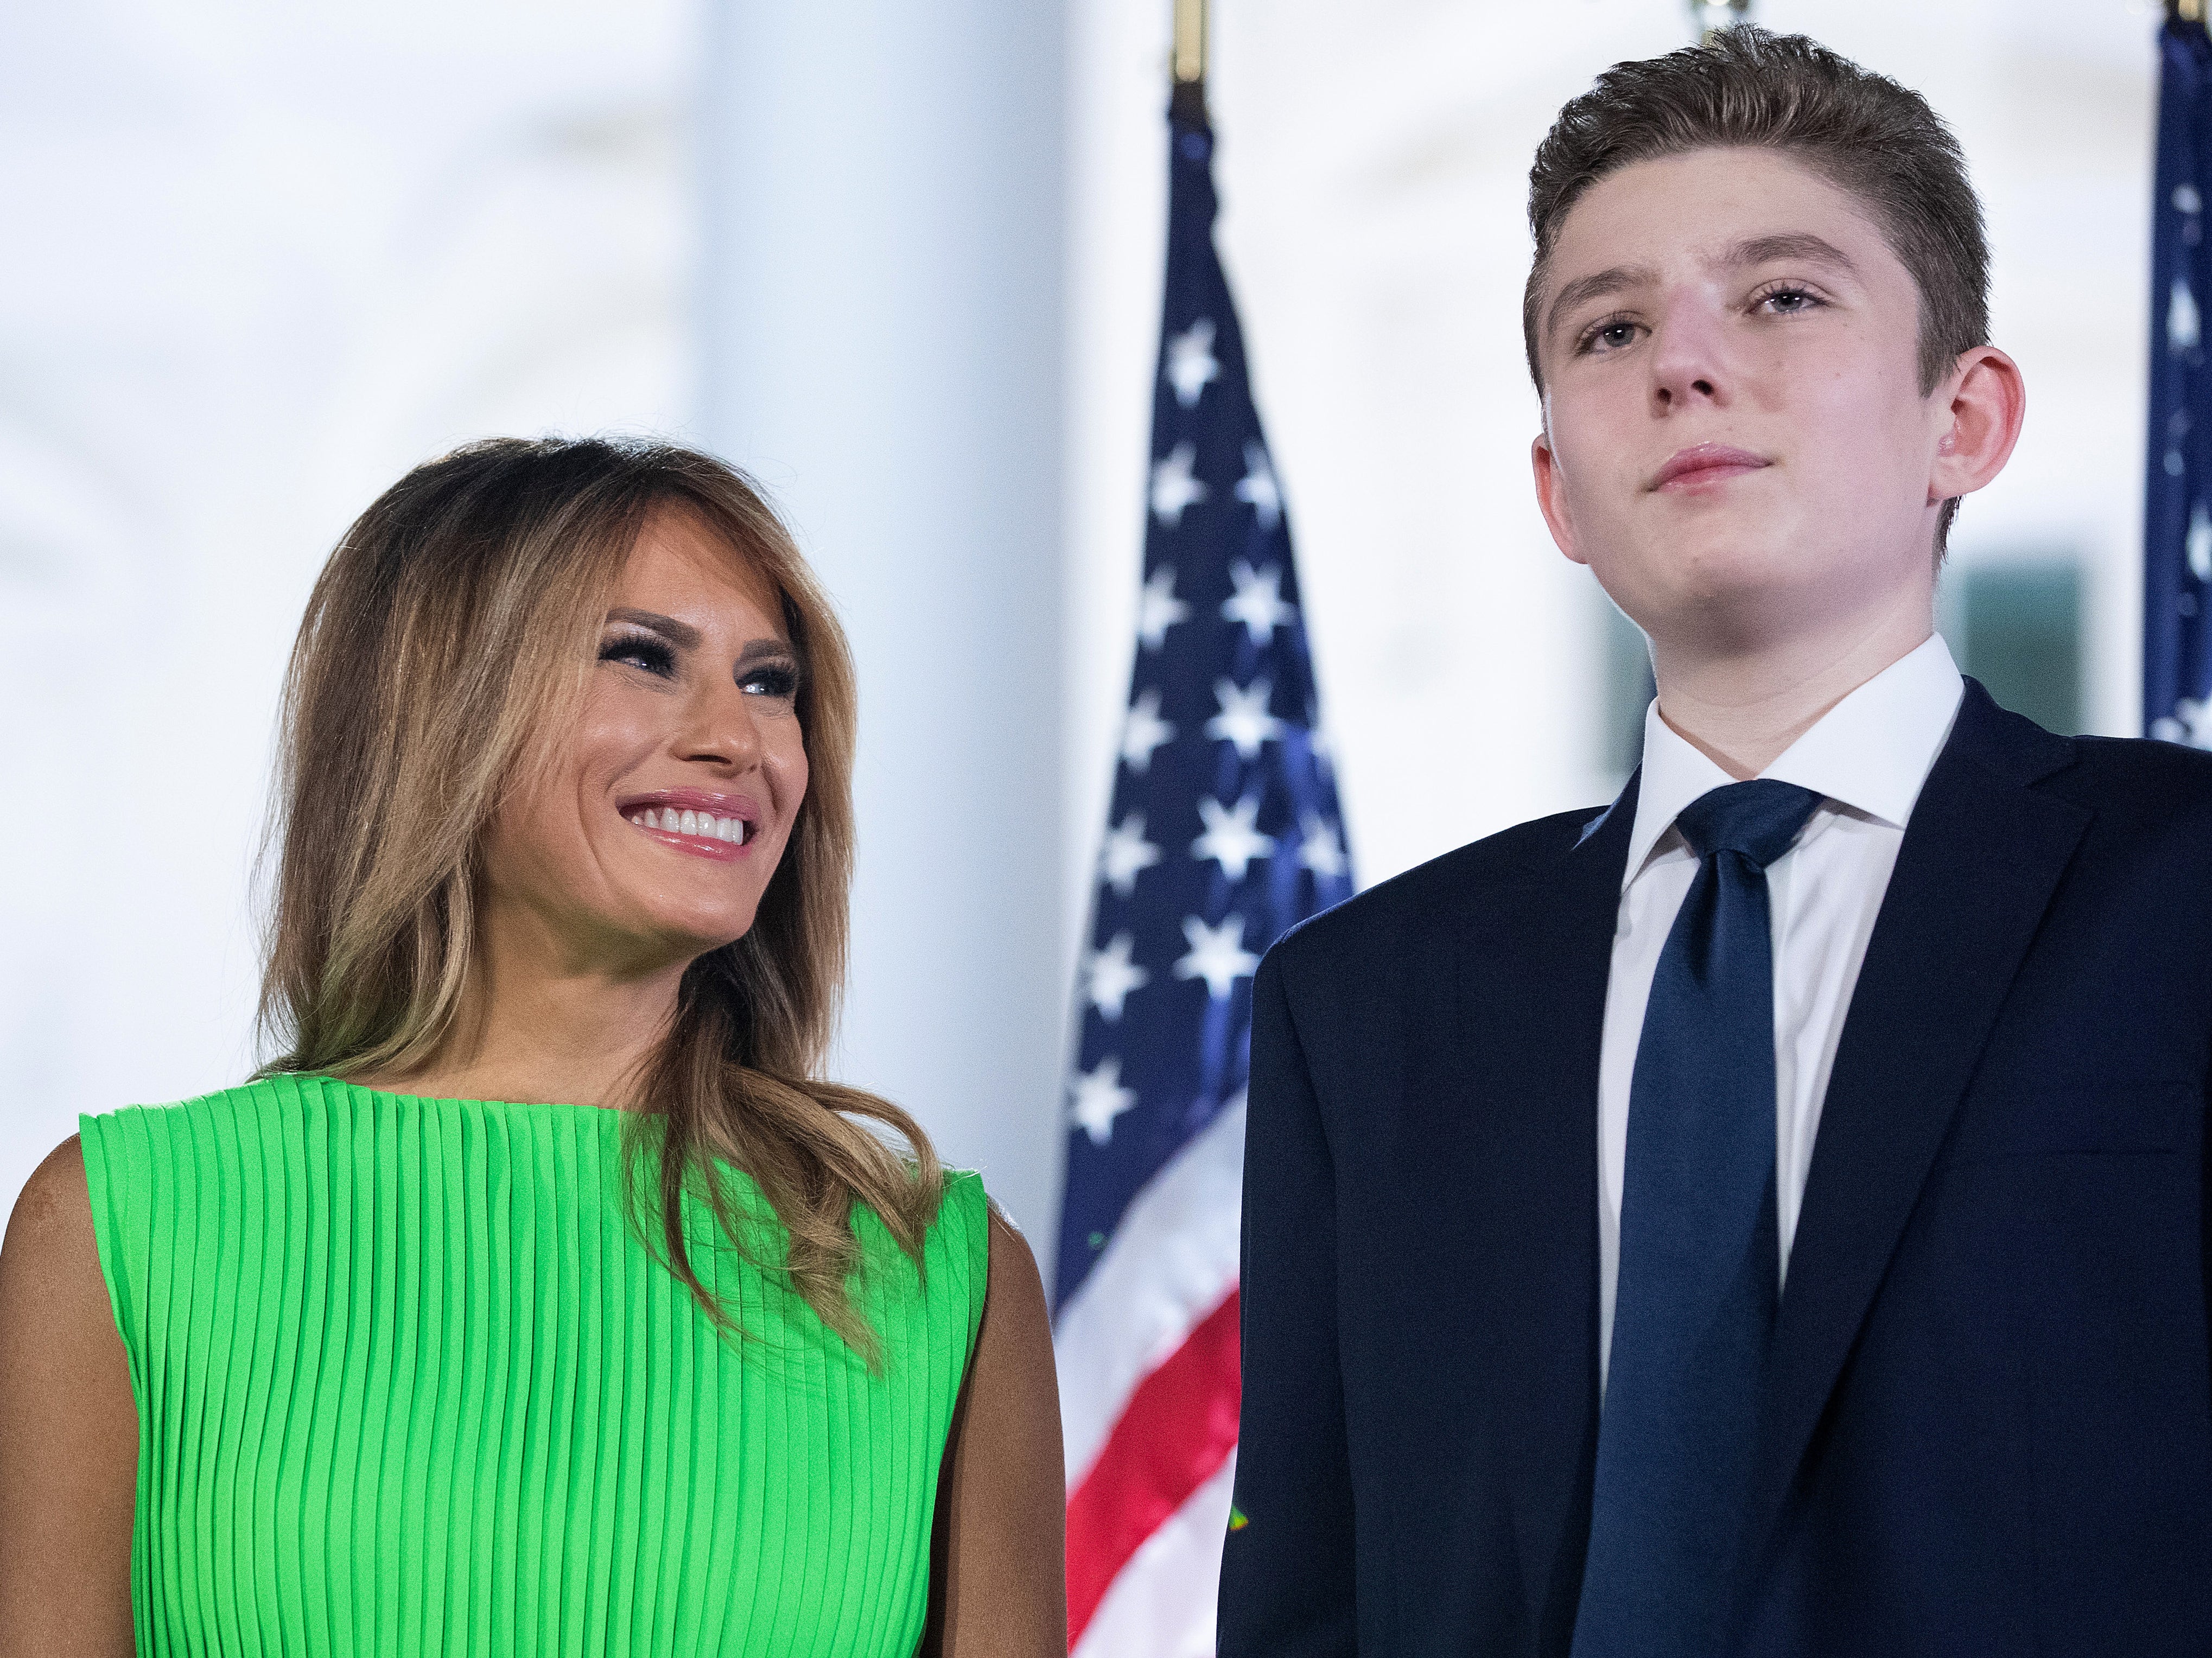 First lady Melania Trump with her son Barron at the White House on 27 August 2020